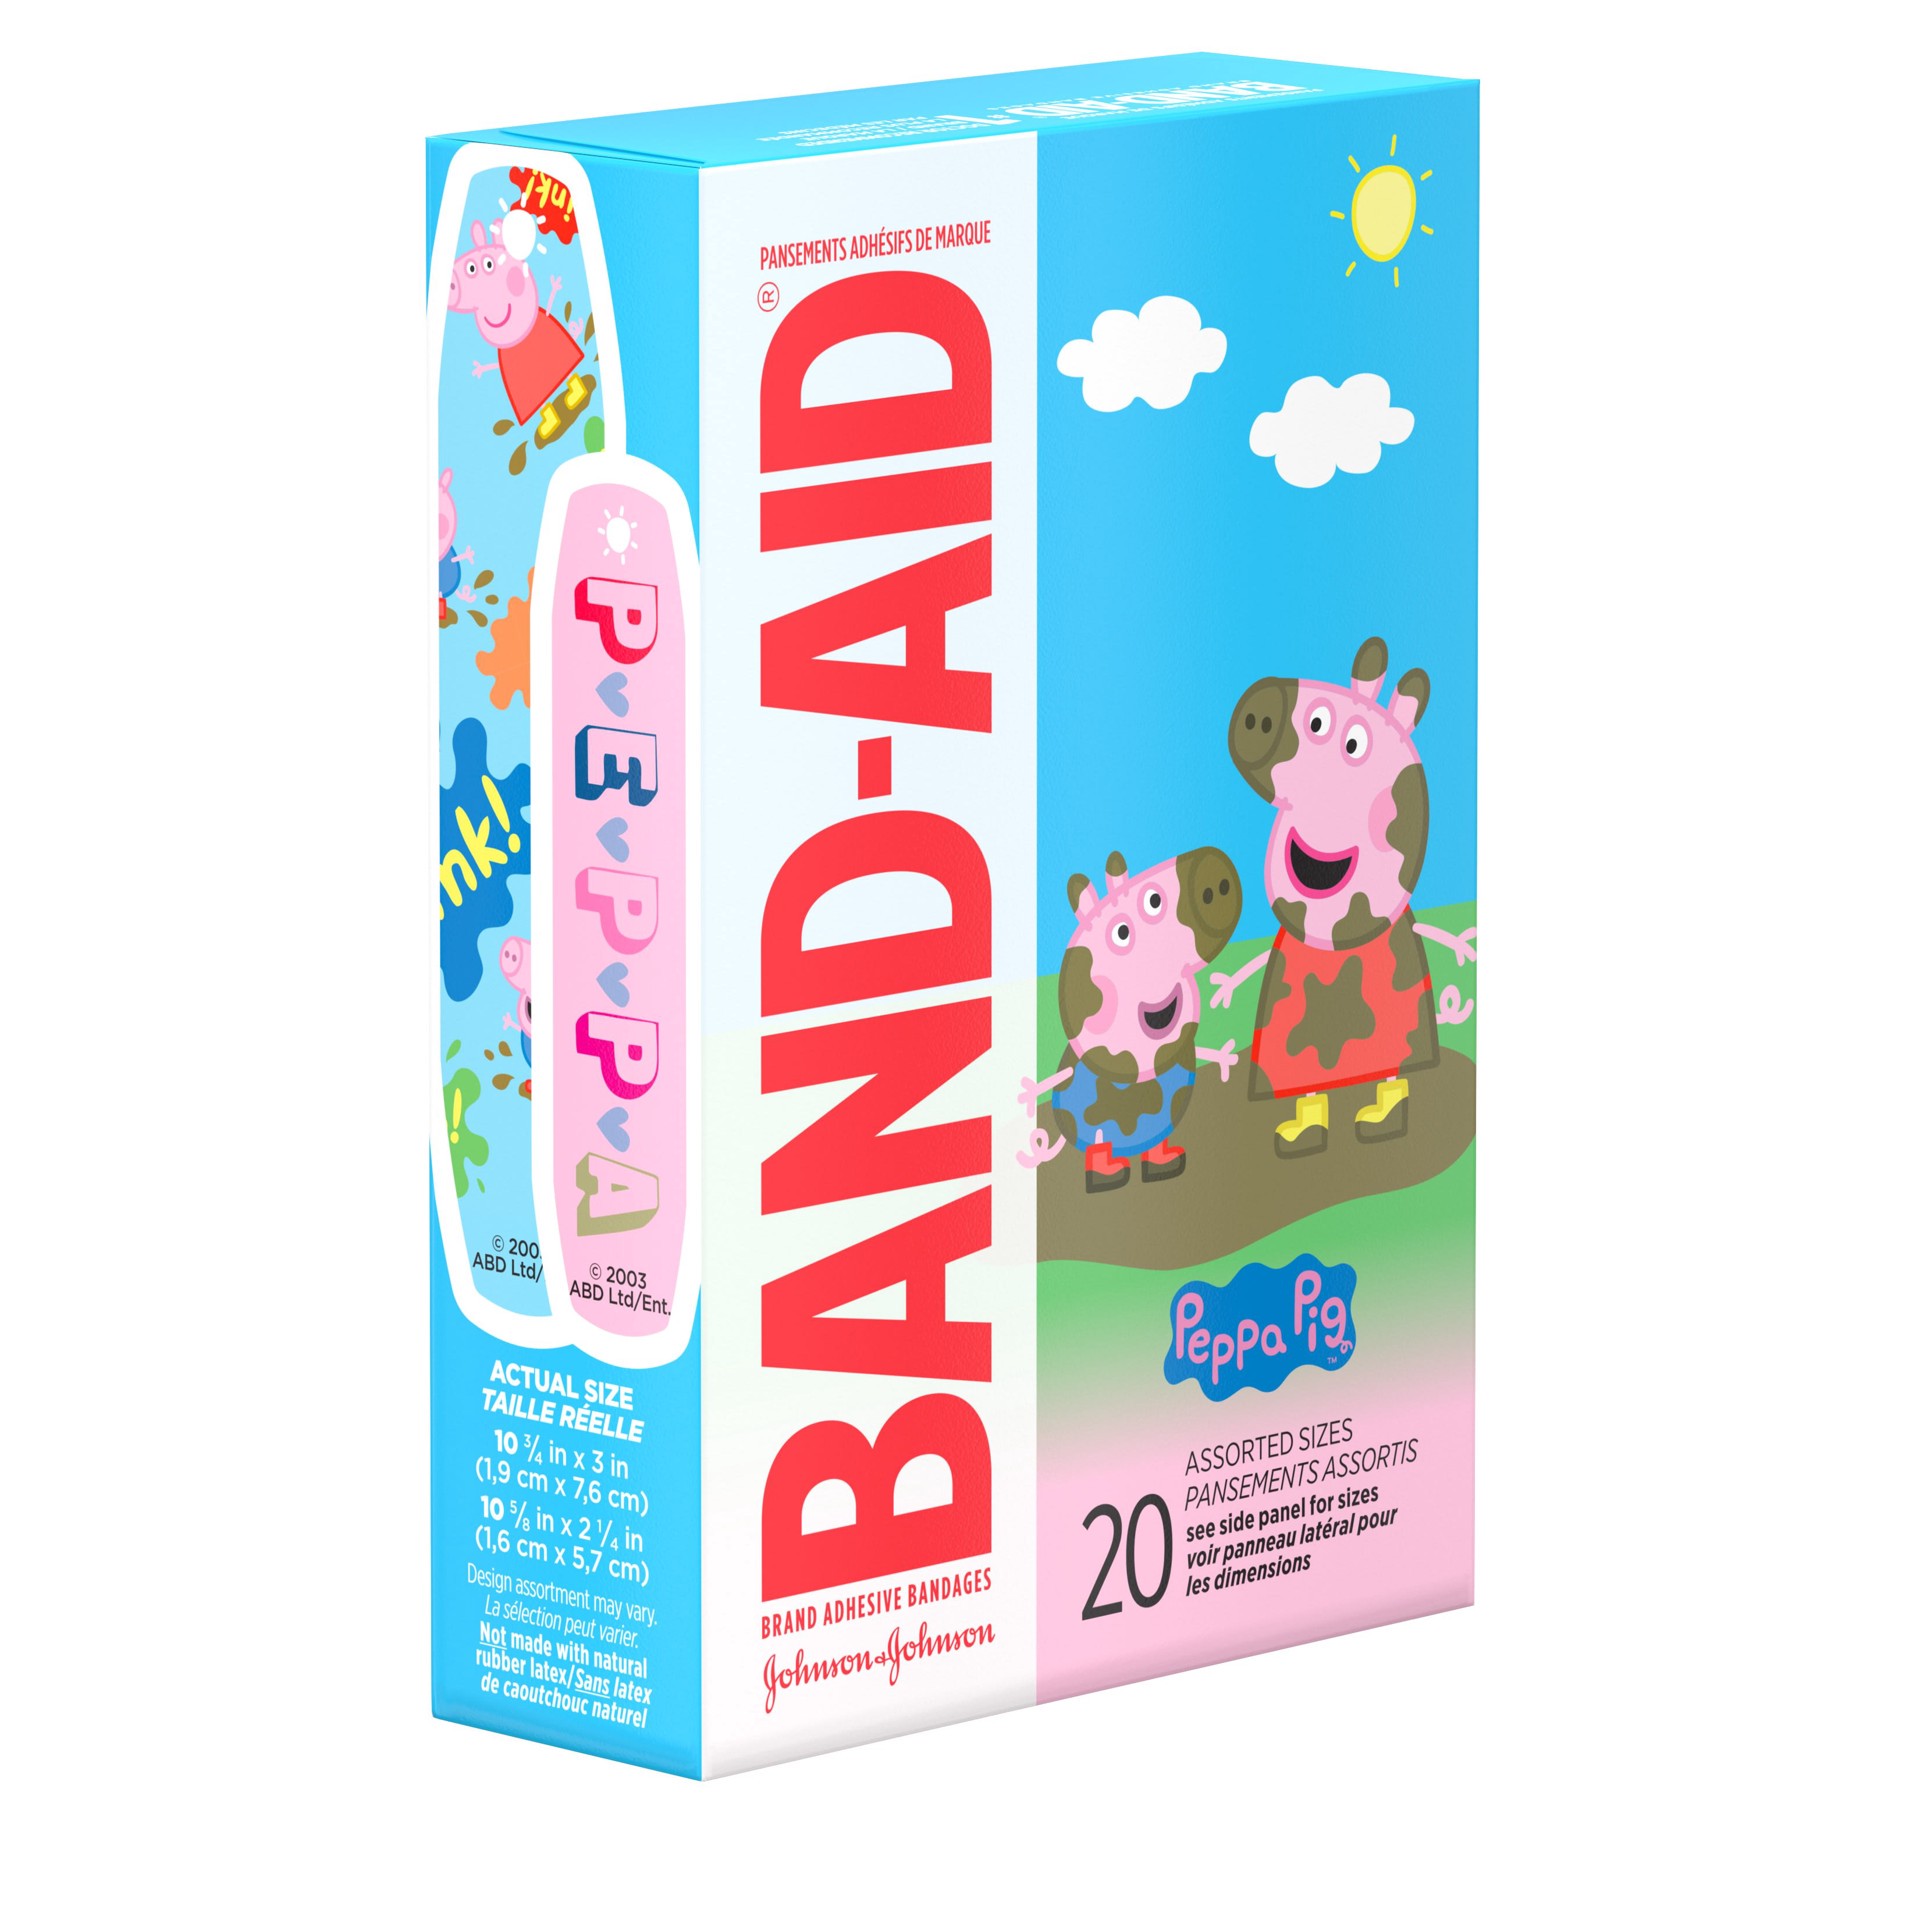 slide 8 of 8, BAND-AID Adhesive Bandages for Minor Cuts and Scrapes, Featuring Peppa Pig for Kids, Assorted Sizes 20 ct, 20 ct